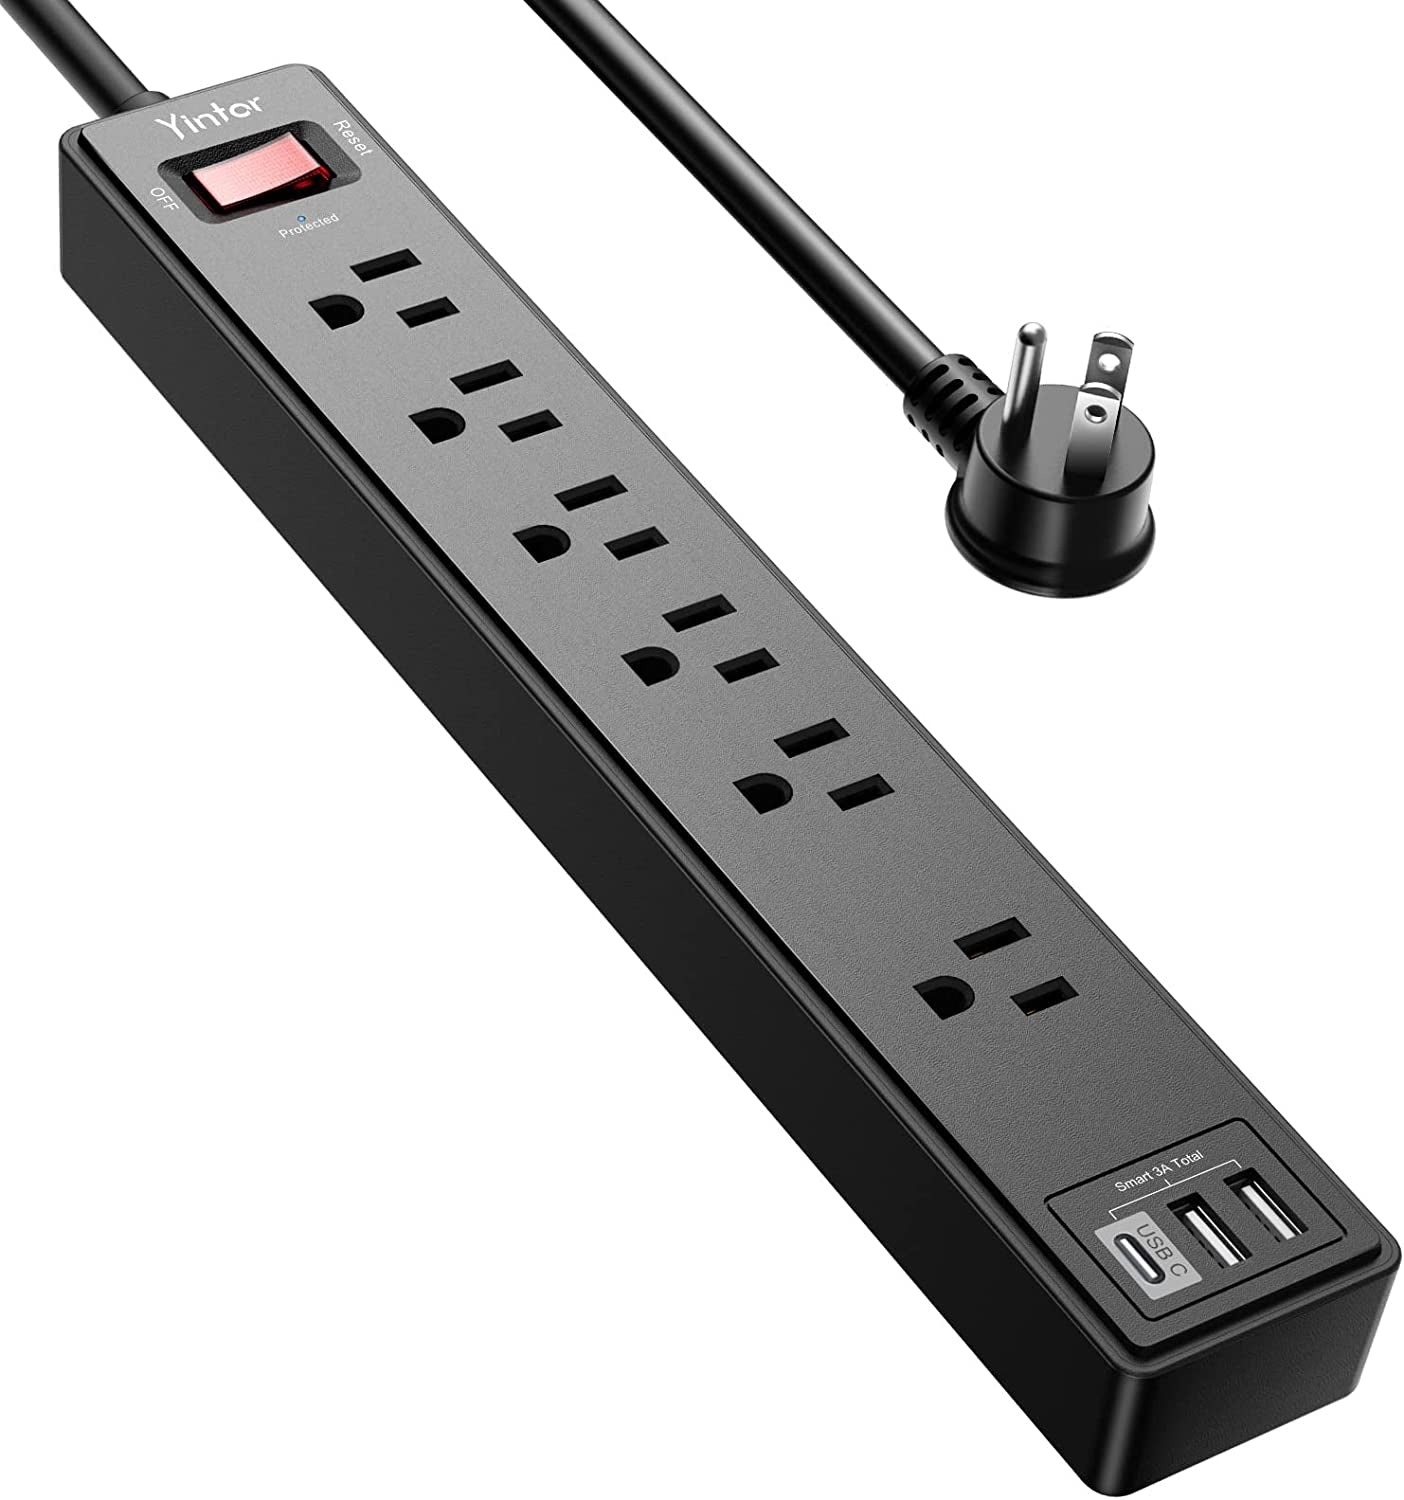 6-Foot Surge Protector Power Strip with 6 AC Outlets and 3 USB Ports,1680 Joules 